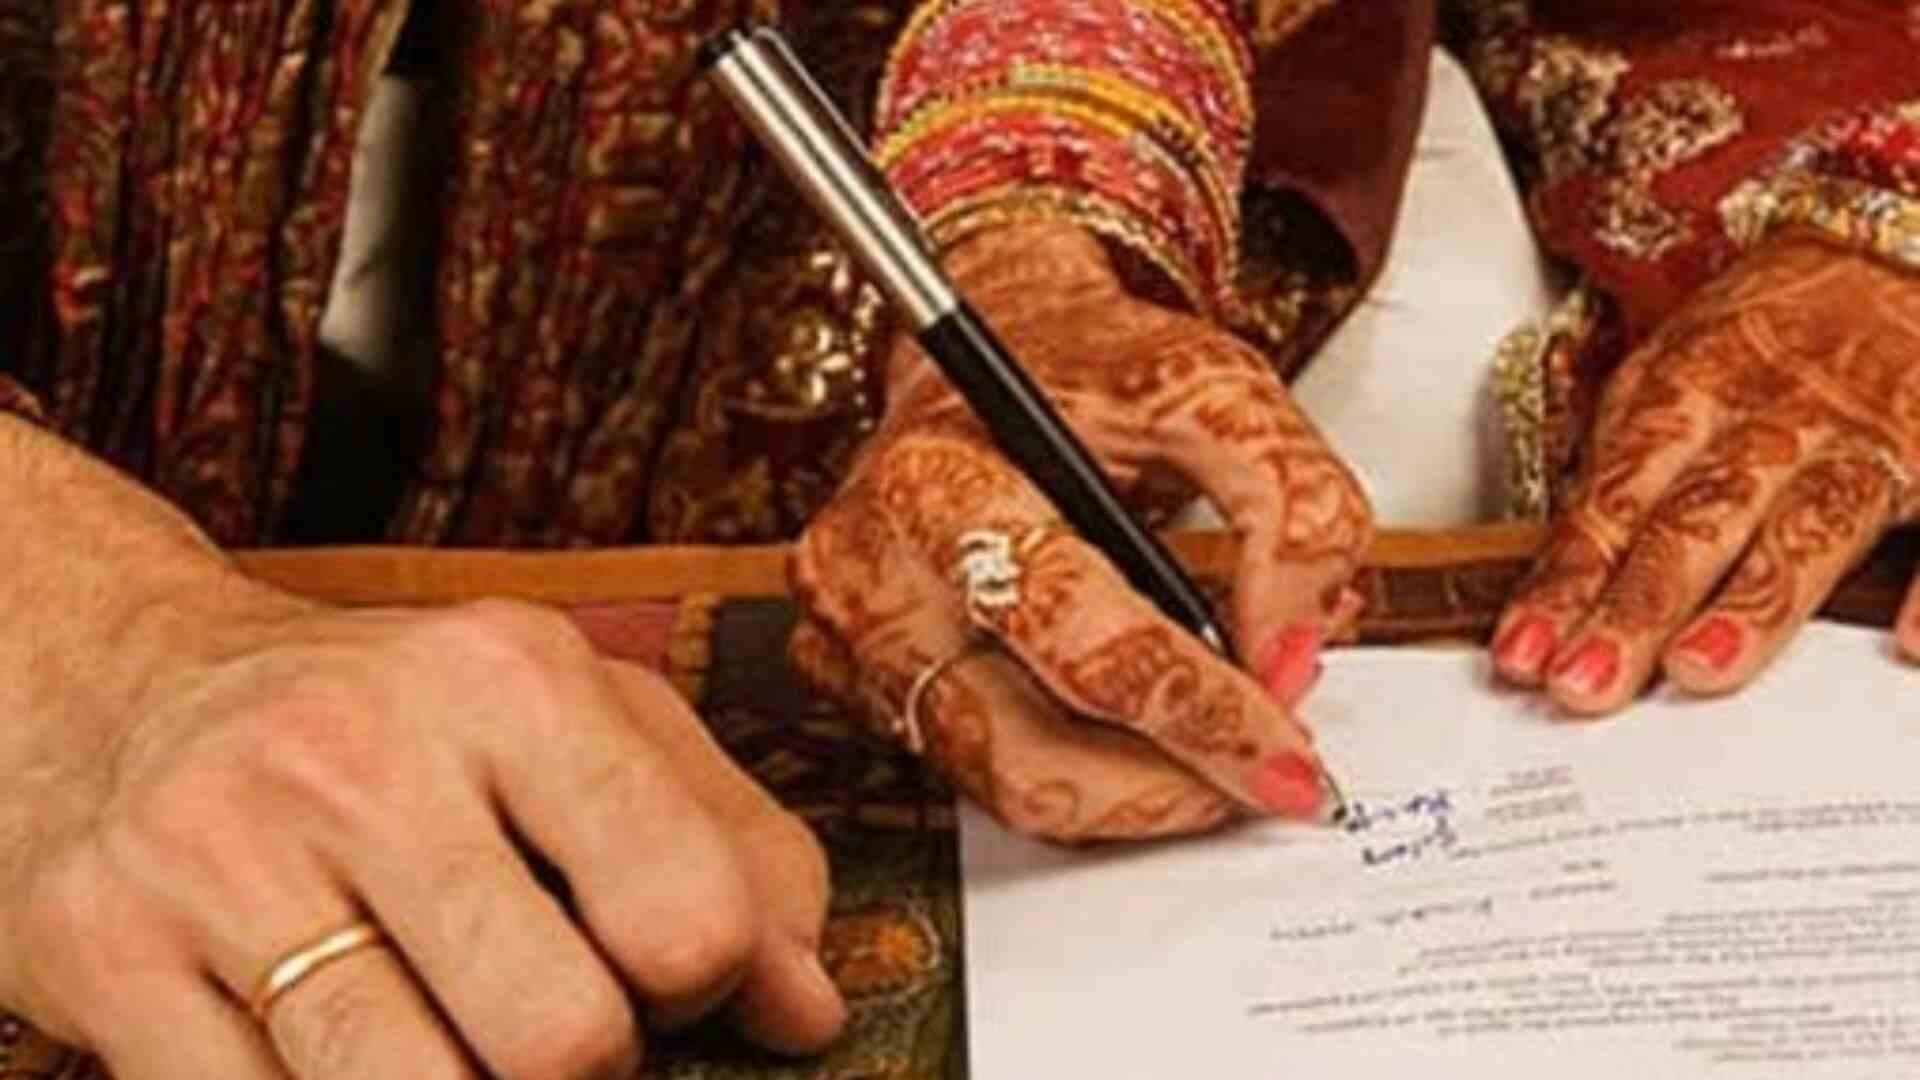 Karachi Girl’s Alleged ‘Forced’ Marriage Raises Concerns Amid Conflicting Age Claims